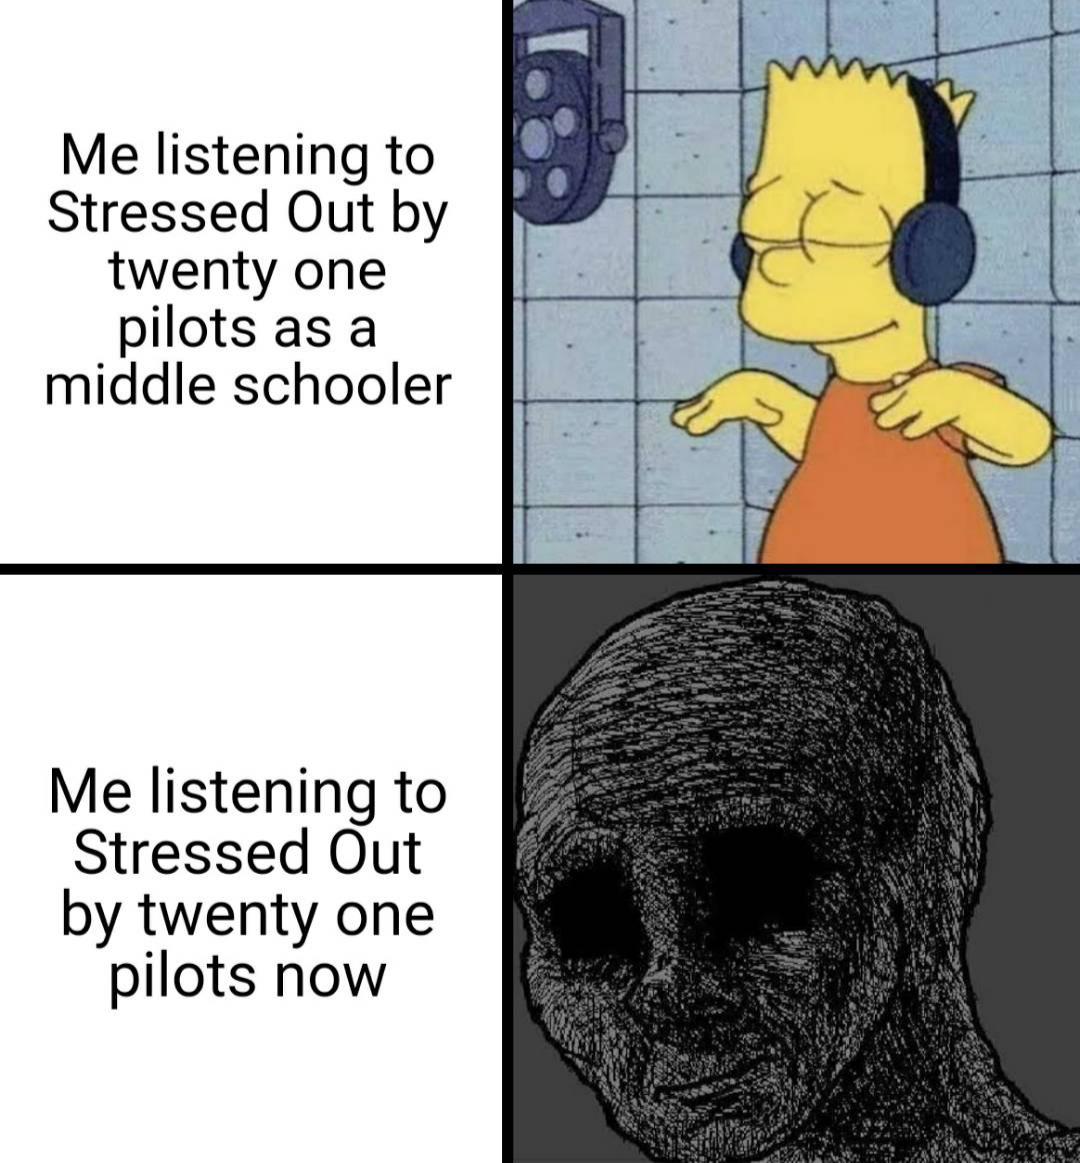 Internet meme - Me listening to Stressed Out by twenty one pilots as a middle schooler Me listening to Stressed Out by twenty one pilots now